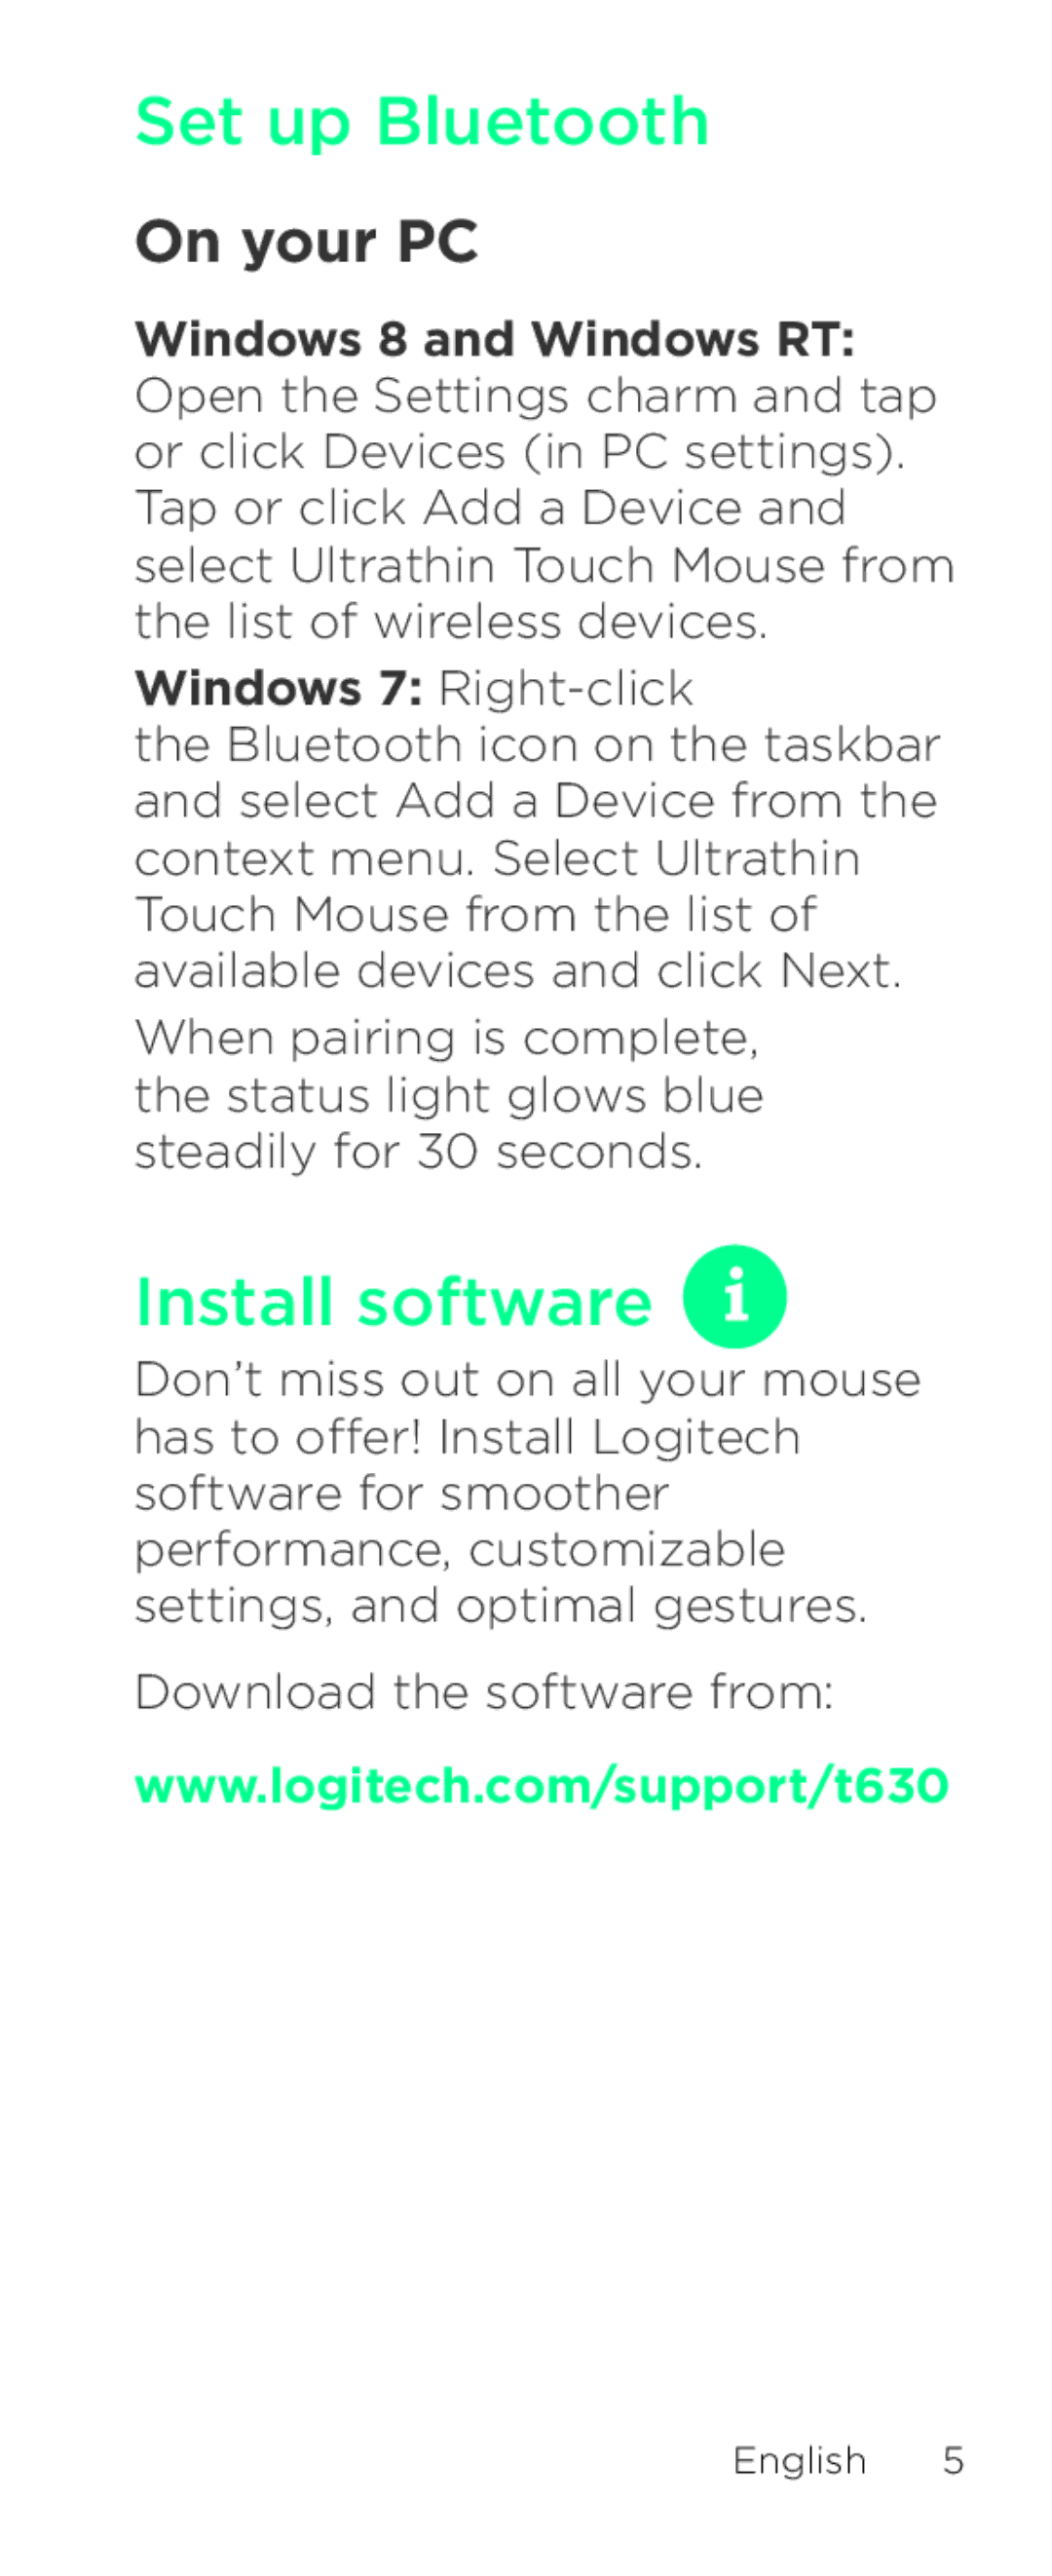 Logitech T630 setup guide Install software, On your PC 